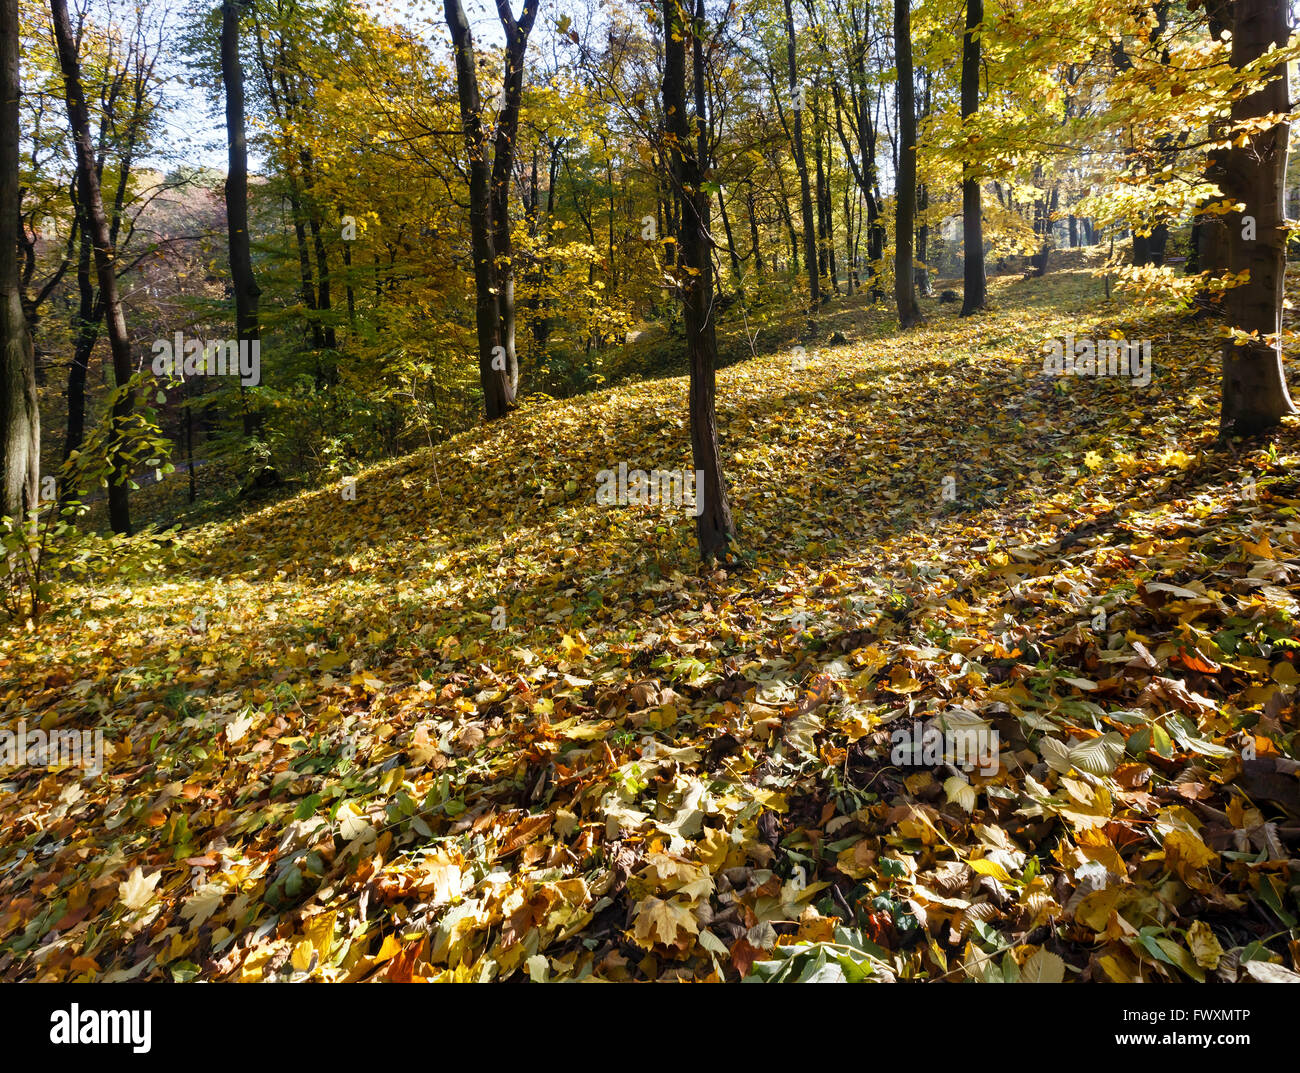 Green-yellow carpet of autumn leaves with shadow of trees in city park. Stock Photo